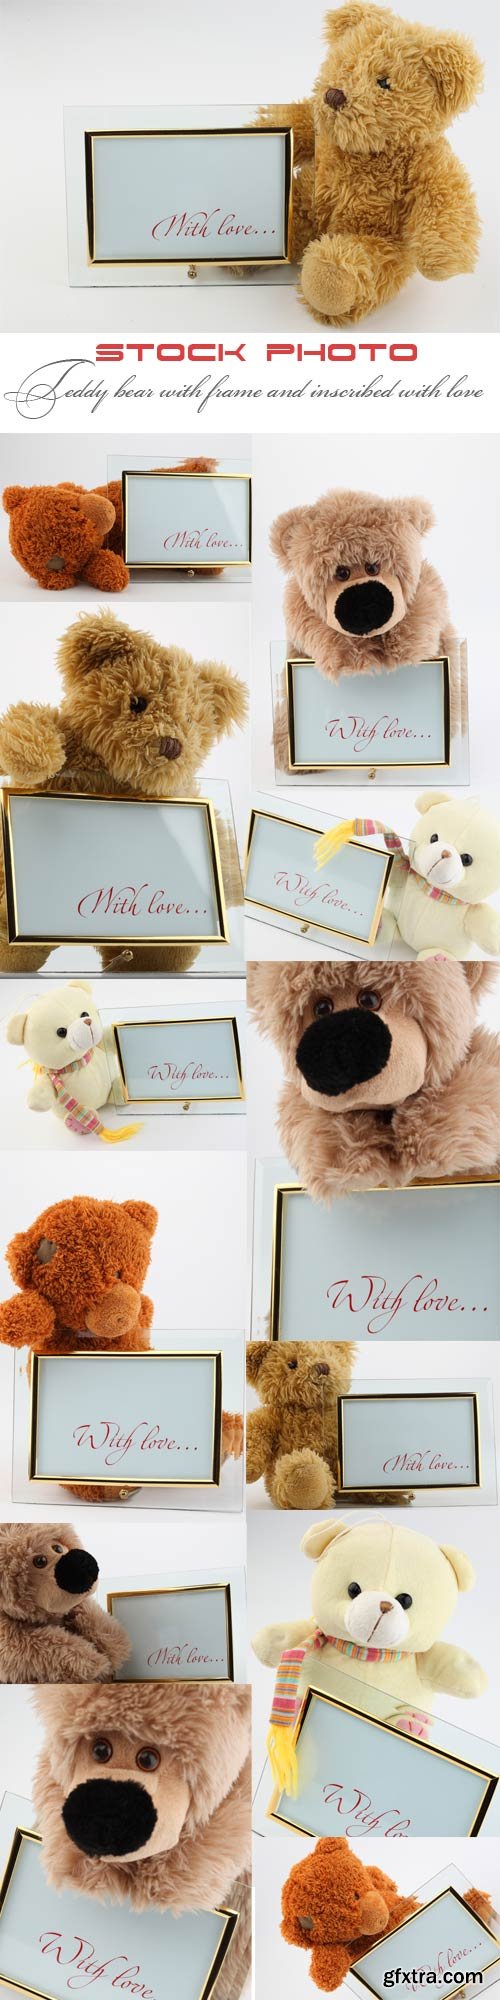 Teddy bear with frame and inscribed with love